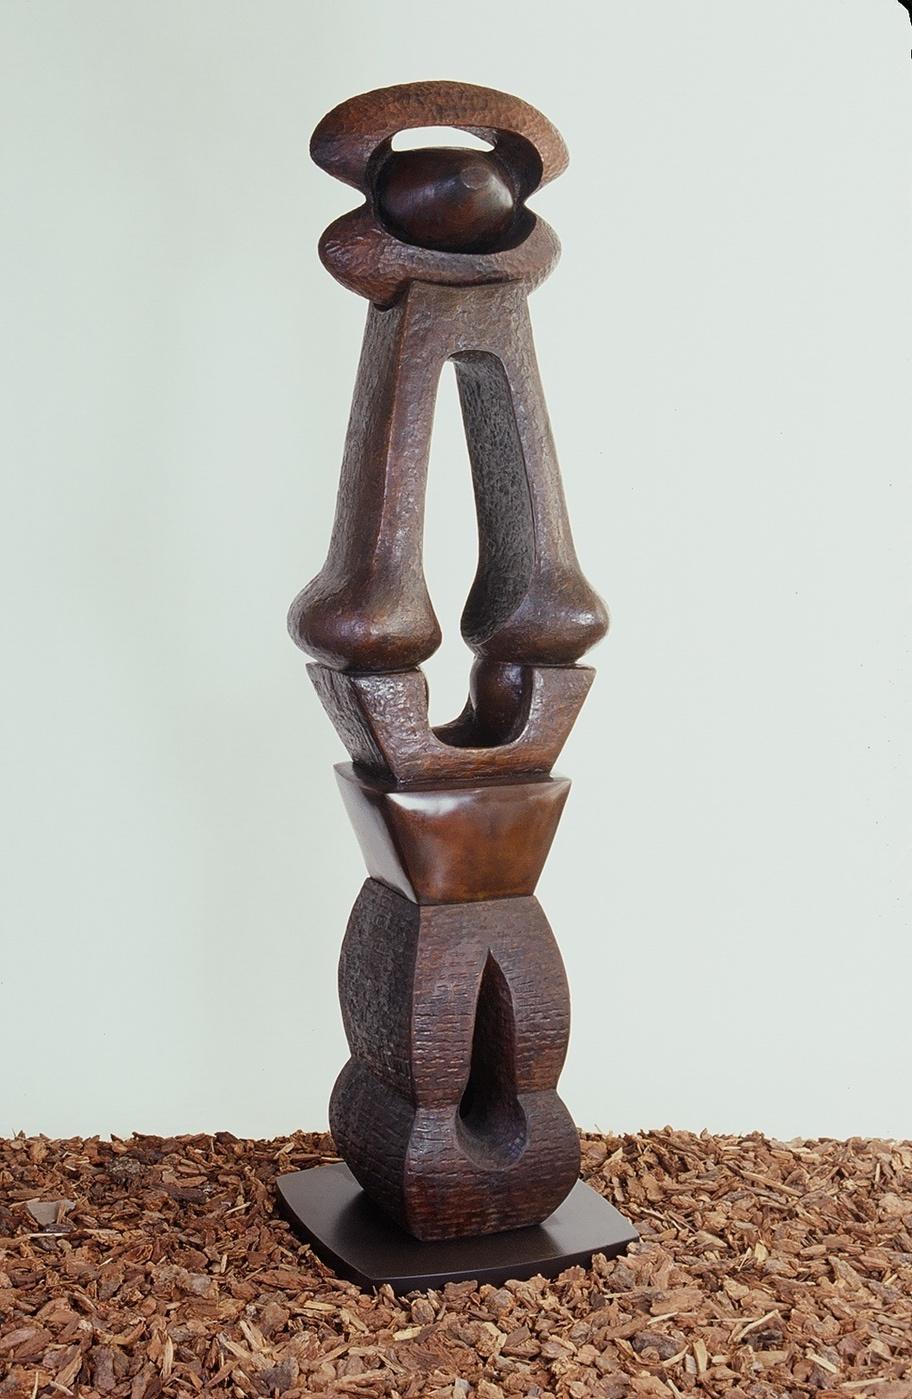 Abstract Sculpture Jean Adele Wolff - Totems de balance grands totems abstraits